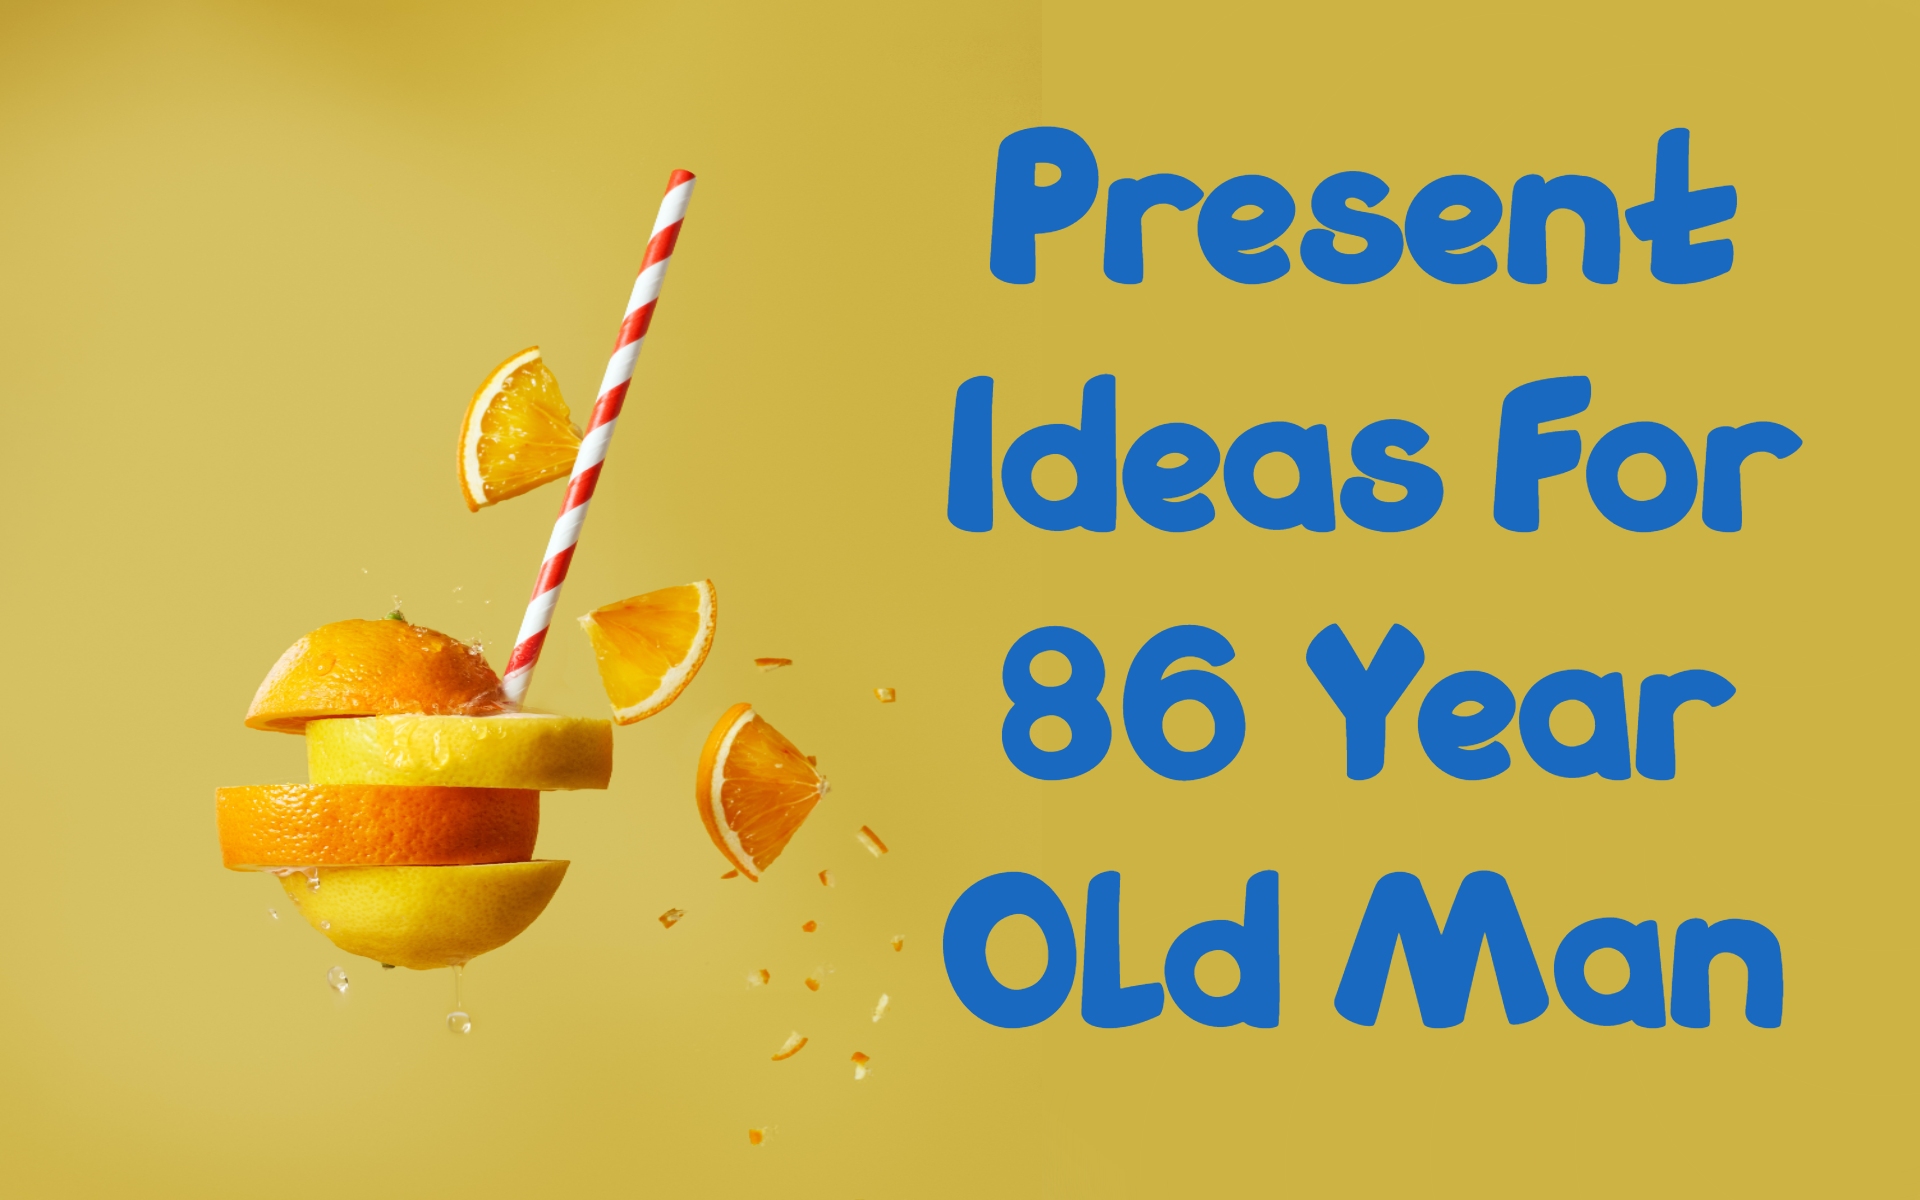 Cover image of gift ideas for 86-year-old man by Giftsedge